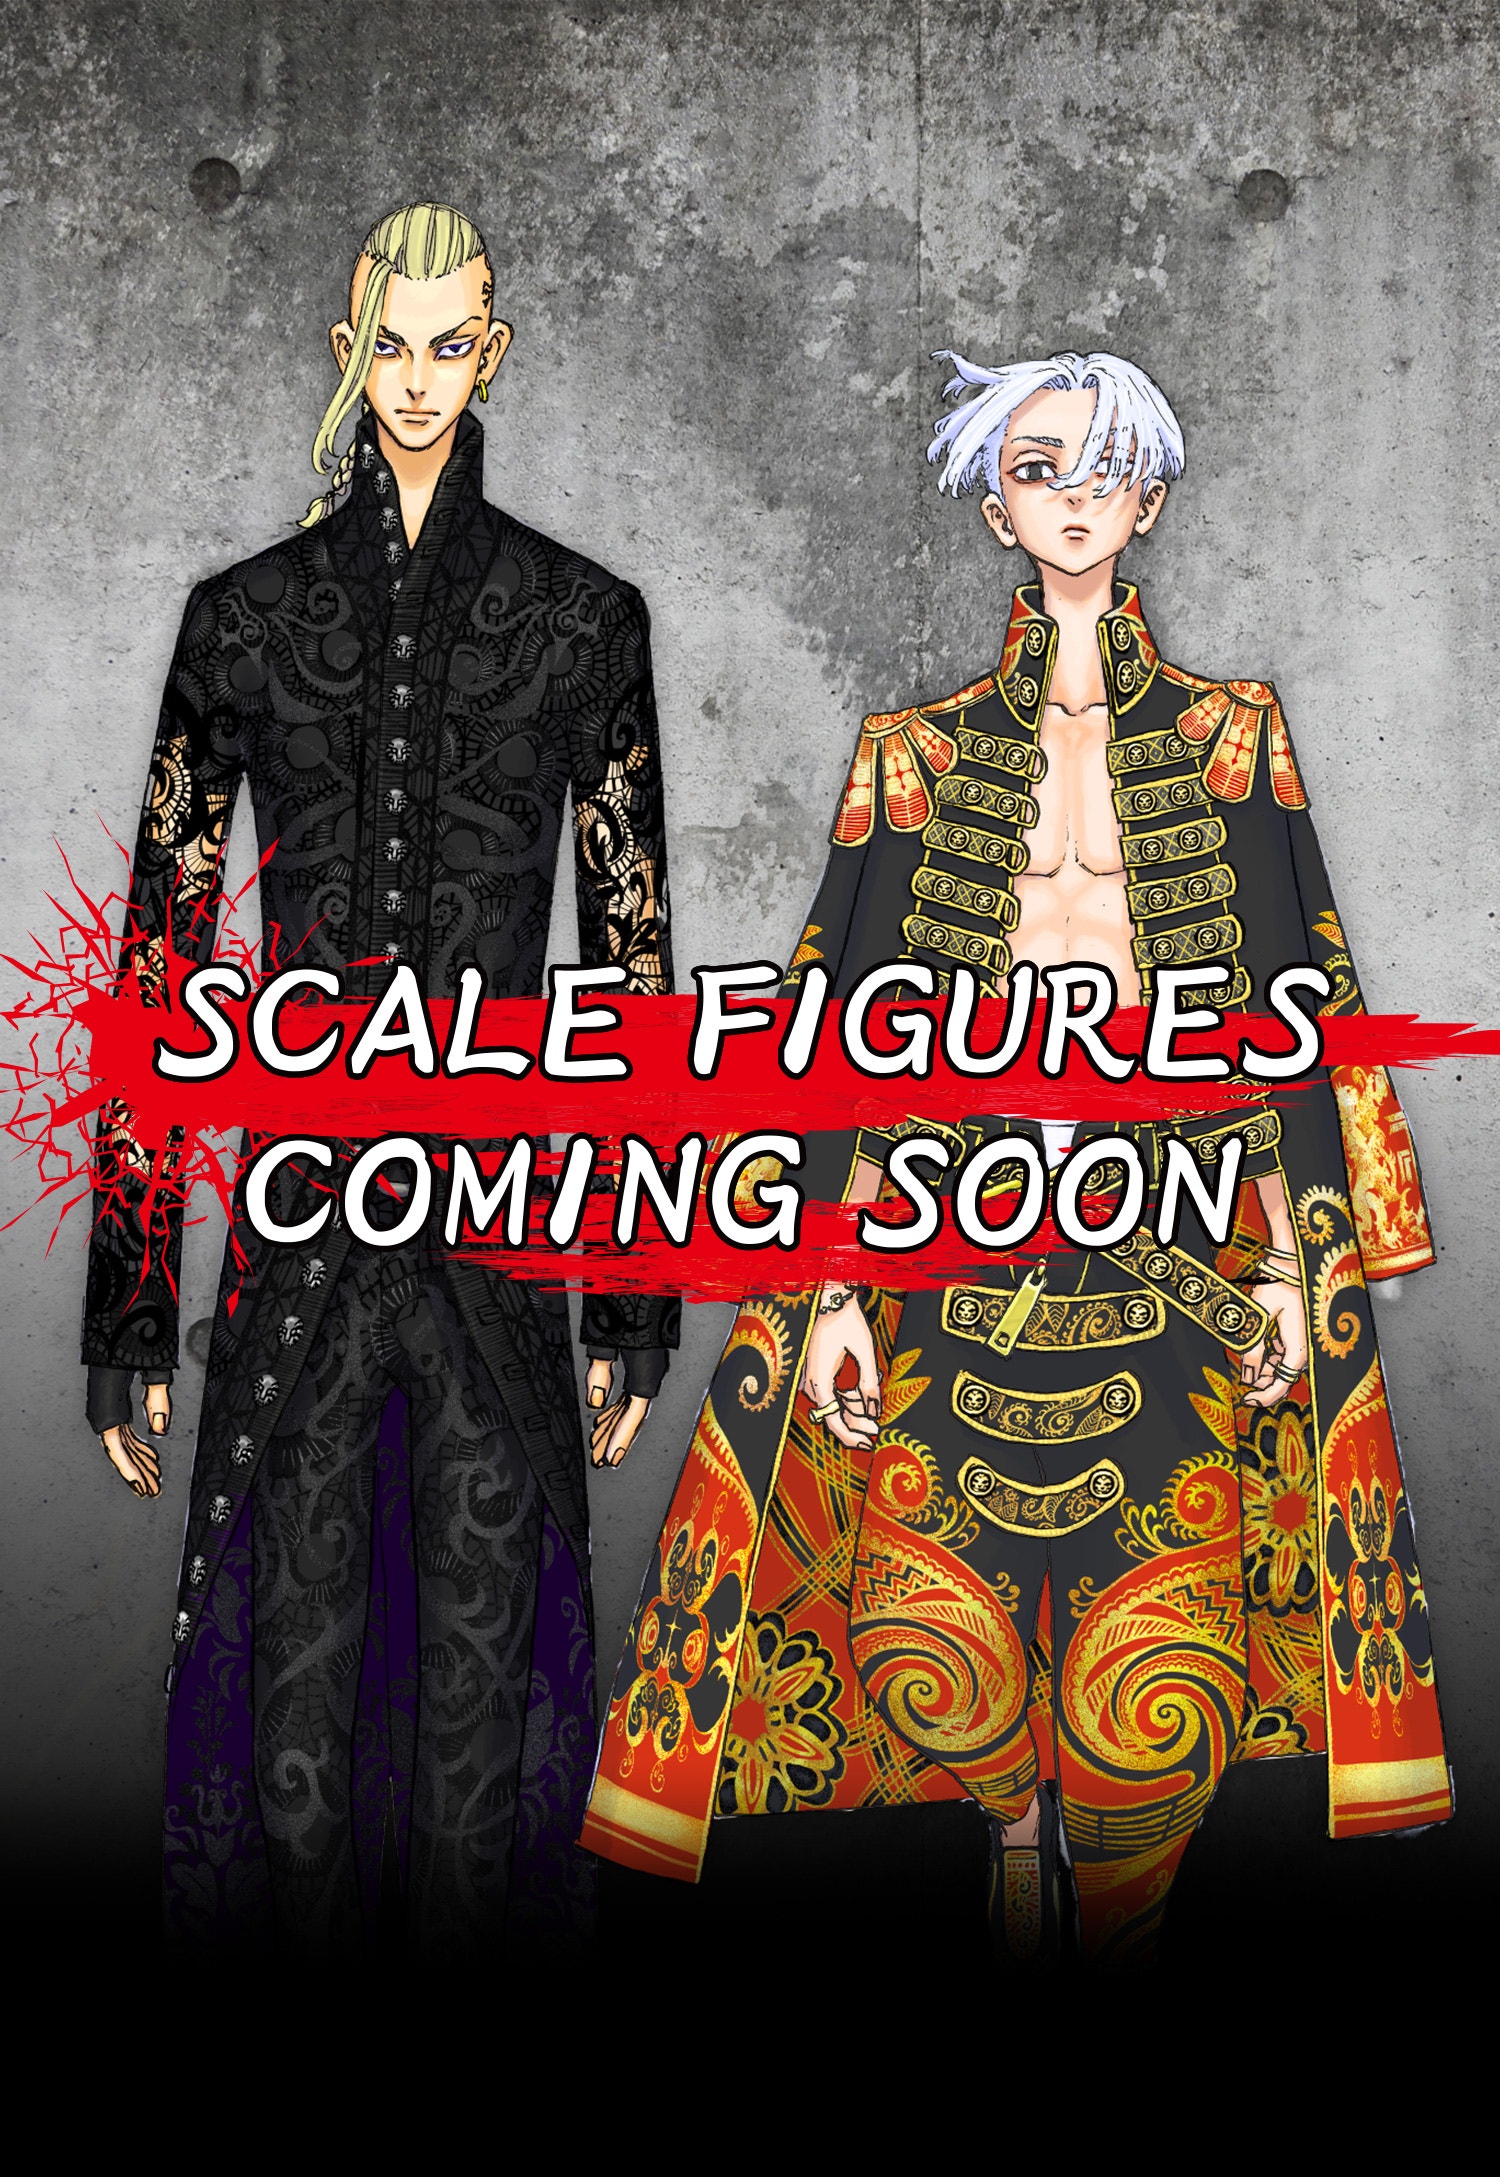 SCALE FIGURES COMING SOON!